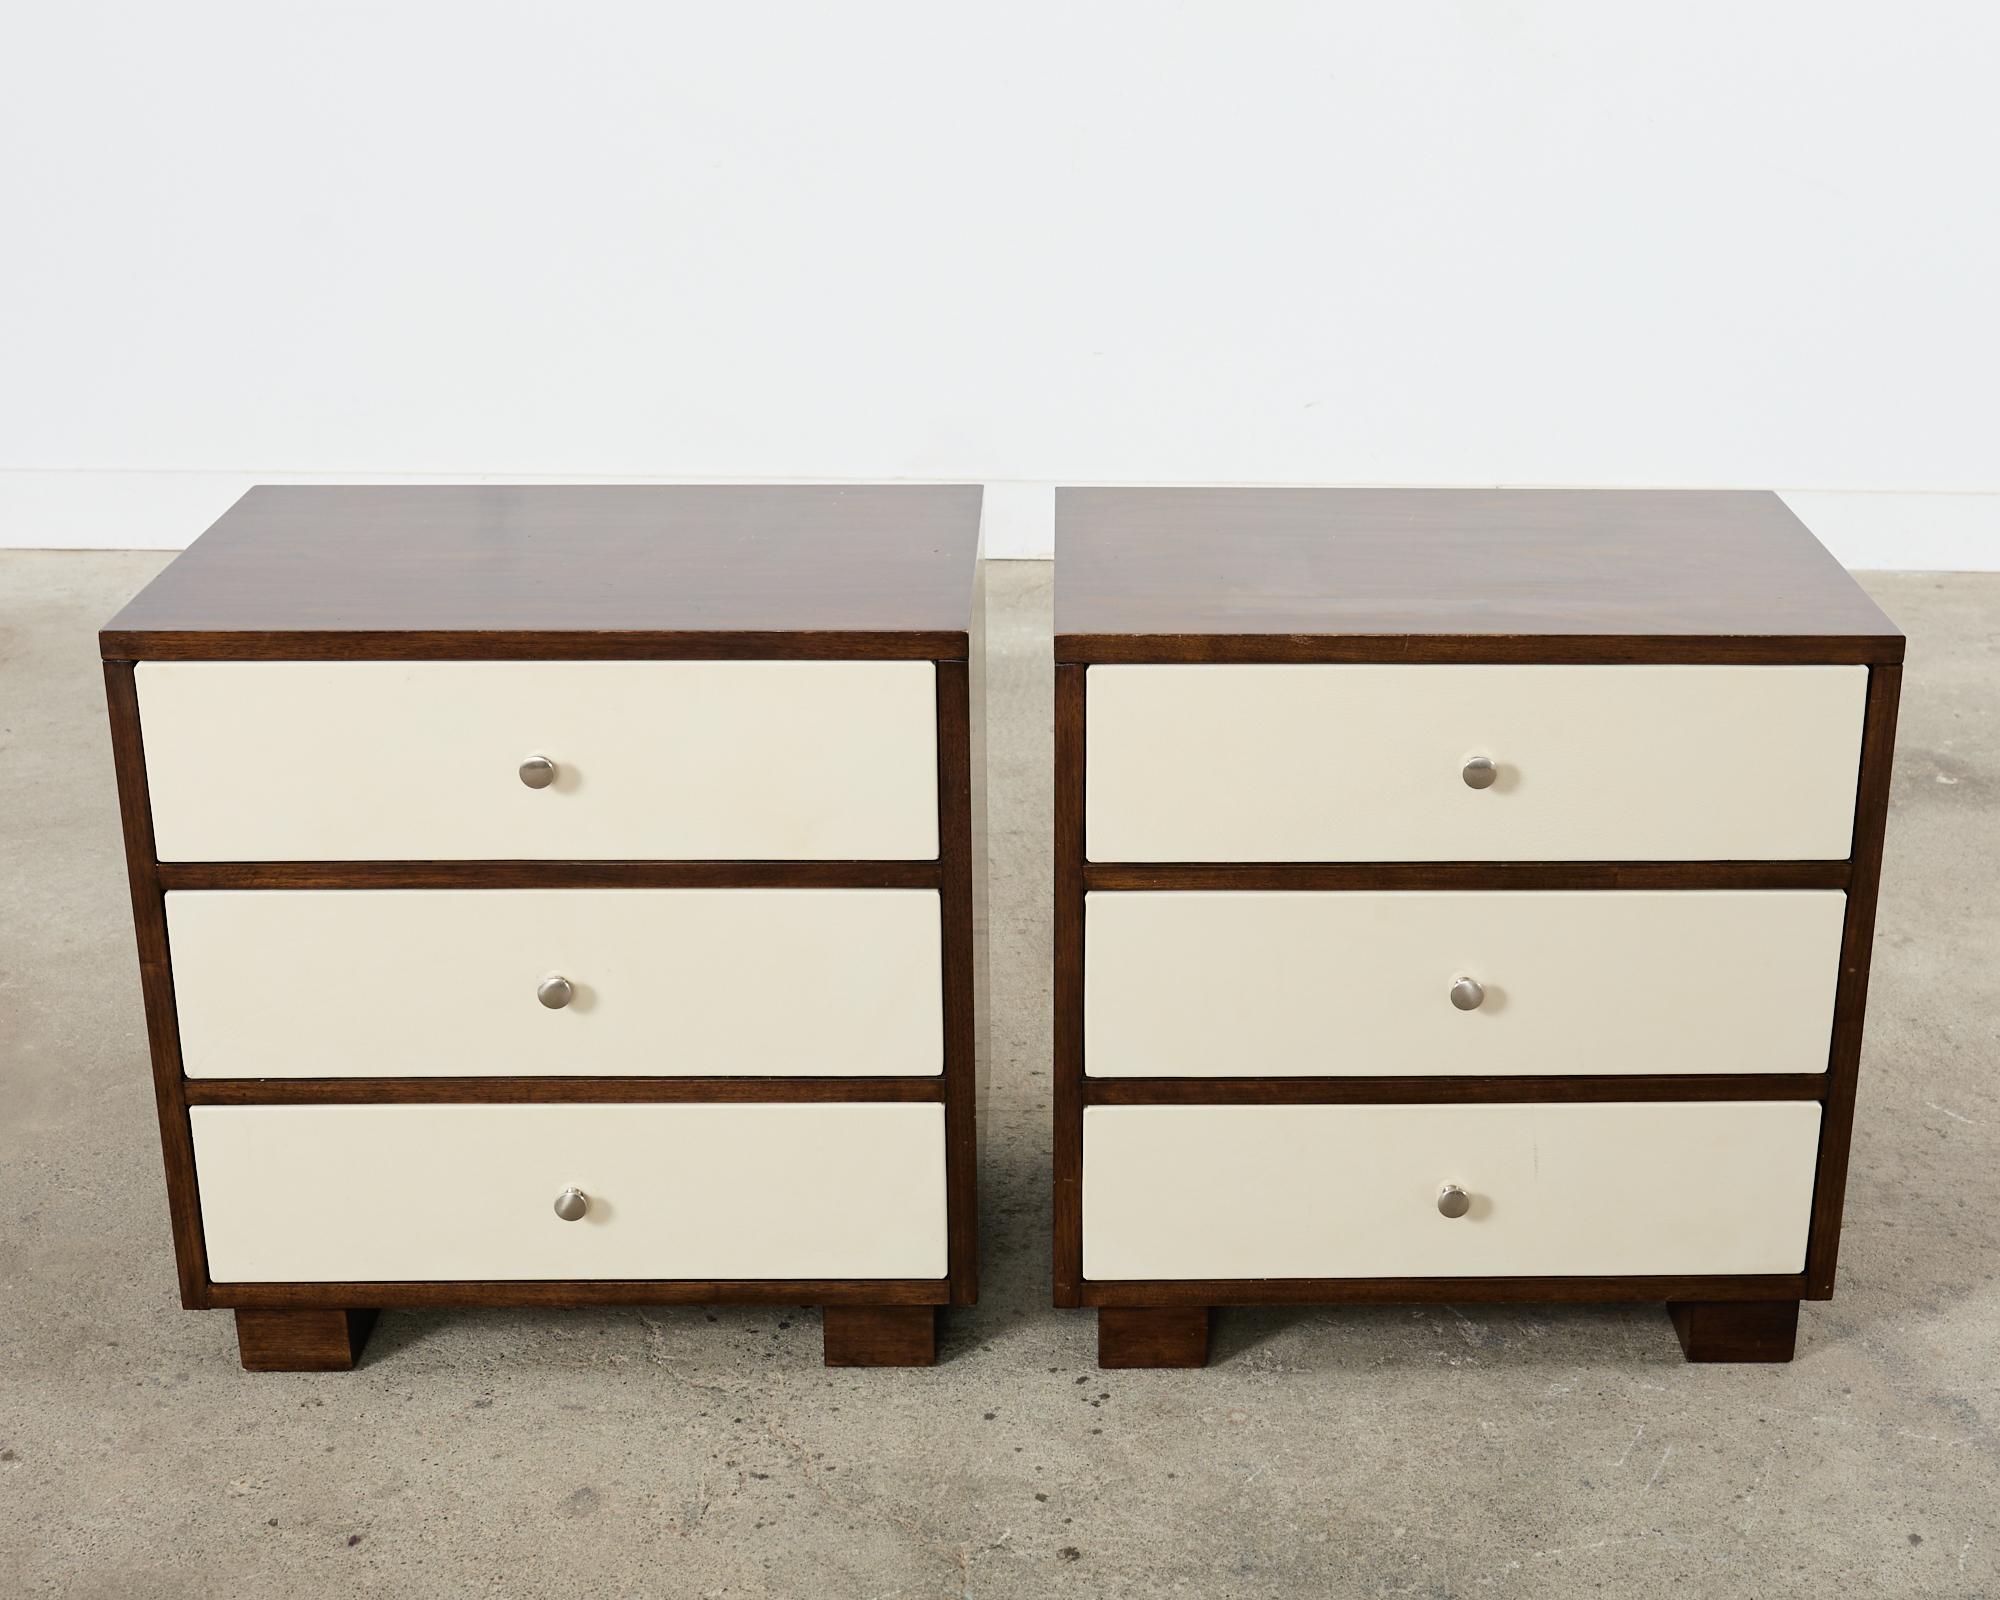 Pair of Art Deco Style Bernhardt Commode Chests or Nightstands In Good Condition For Sale In Rio Vista, CA